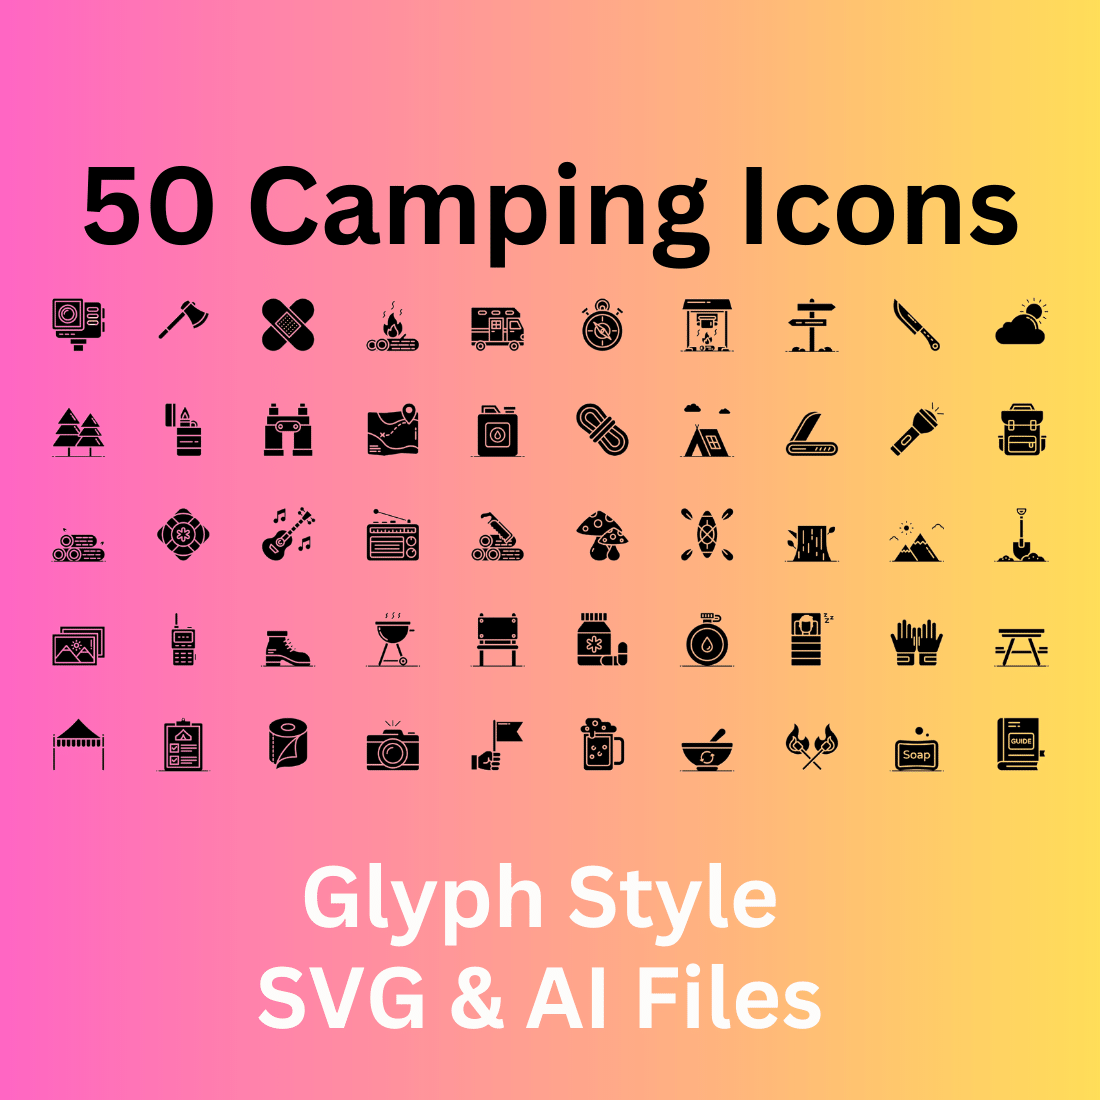 Camping Icon Set 50 Glyph Icons - SVG And AI Files cover image.